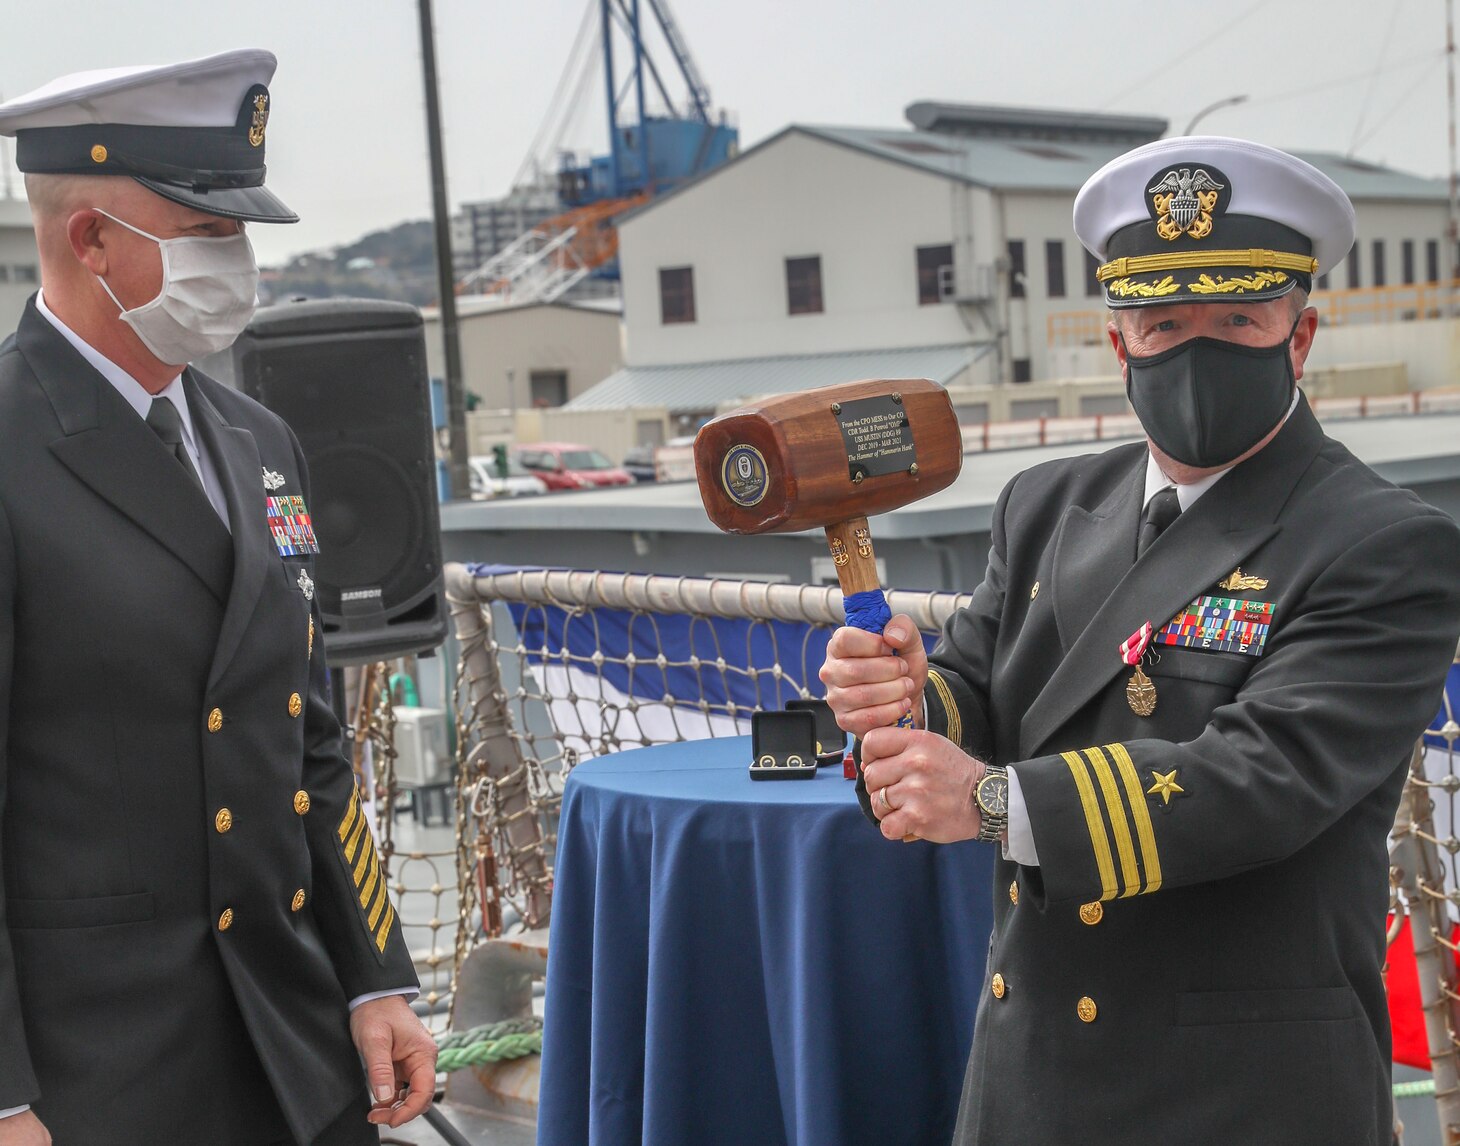 YOKOSUKA, Japan (March 19, 2021) Cmdr. Todd Penrod receives gifts from the Chief's Mess of the  Arleigh-Burke class guided-missile destroyer USS Mustin (DDG 89) during a change of command ceremony aboard  Mustin while in port at Naval Base Yokosuka. (US Navy photo by Mass Communication Specialist 3rd Class Arthur Rosen)